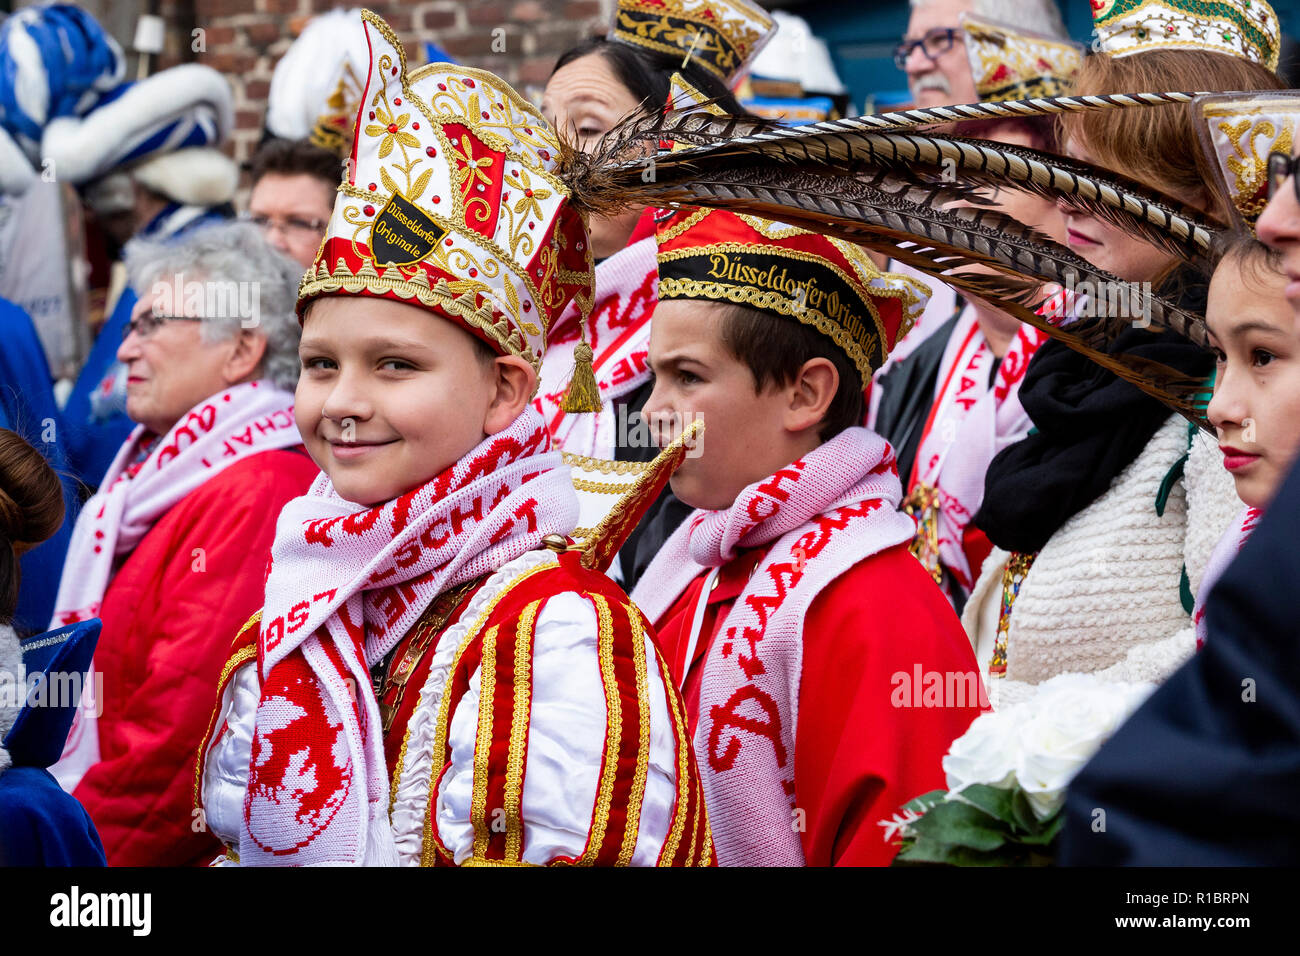 Düsseldorf, Germany. 11 November 2018. The German carnival season traditionally starts at 11 minutes past 11 o'clock on 11 November which today coincided with the centenary of Armistice Day, the end of World War I. Photo: 51North/Alamy Live News Stock Photo